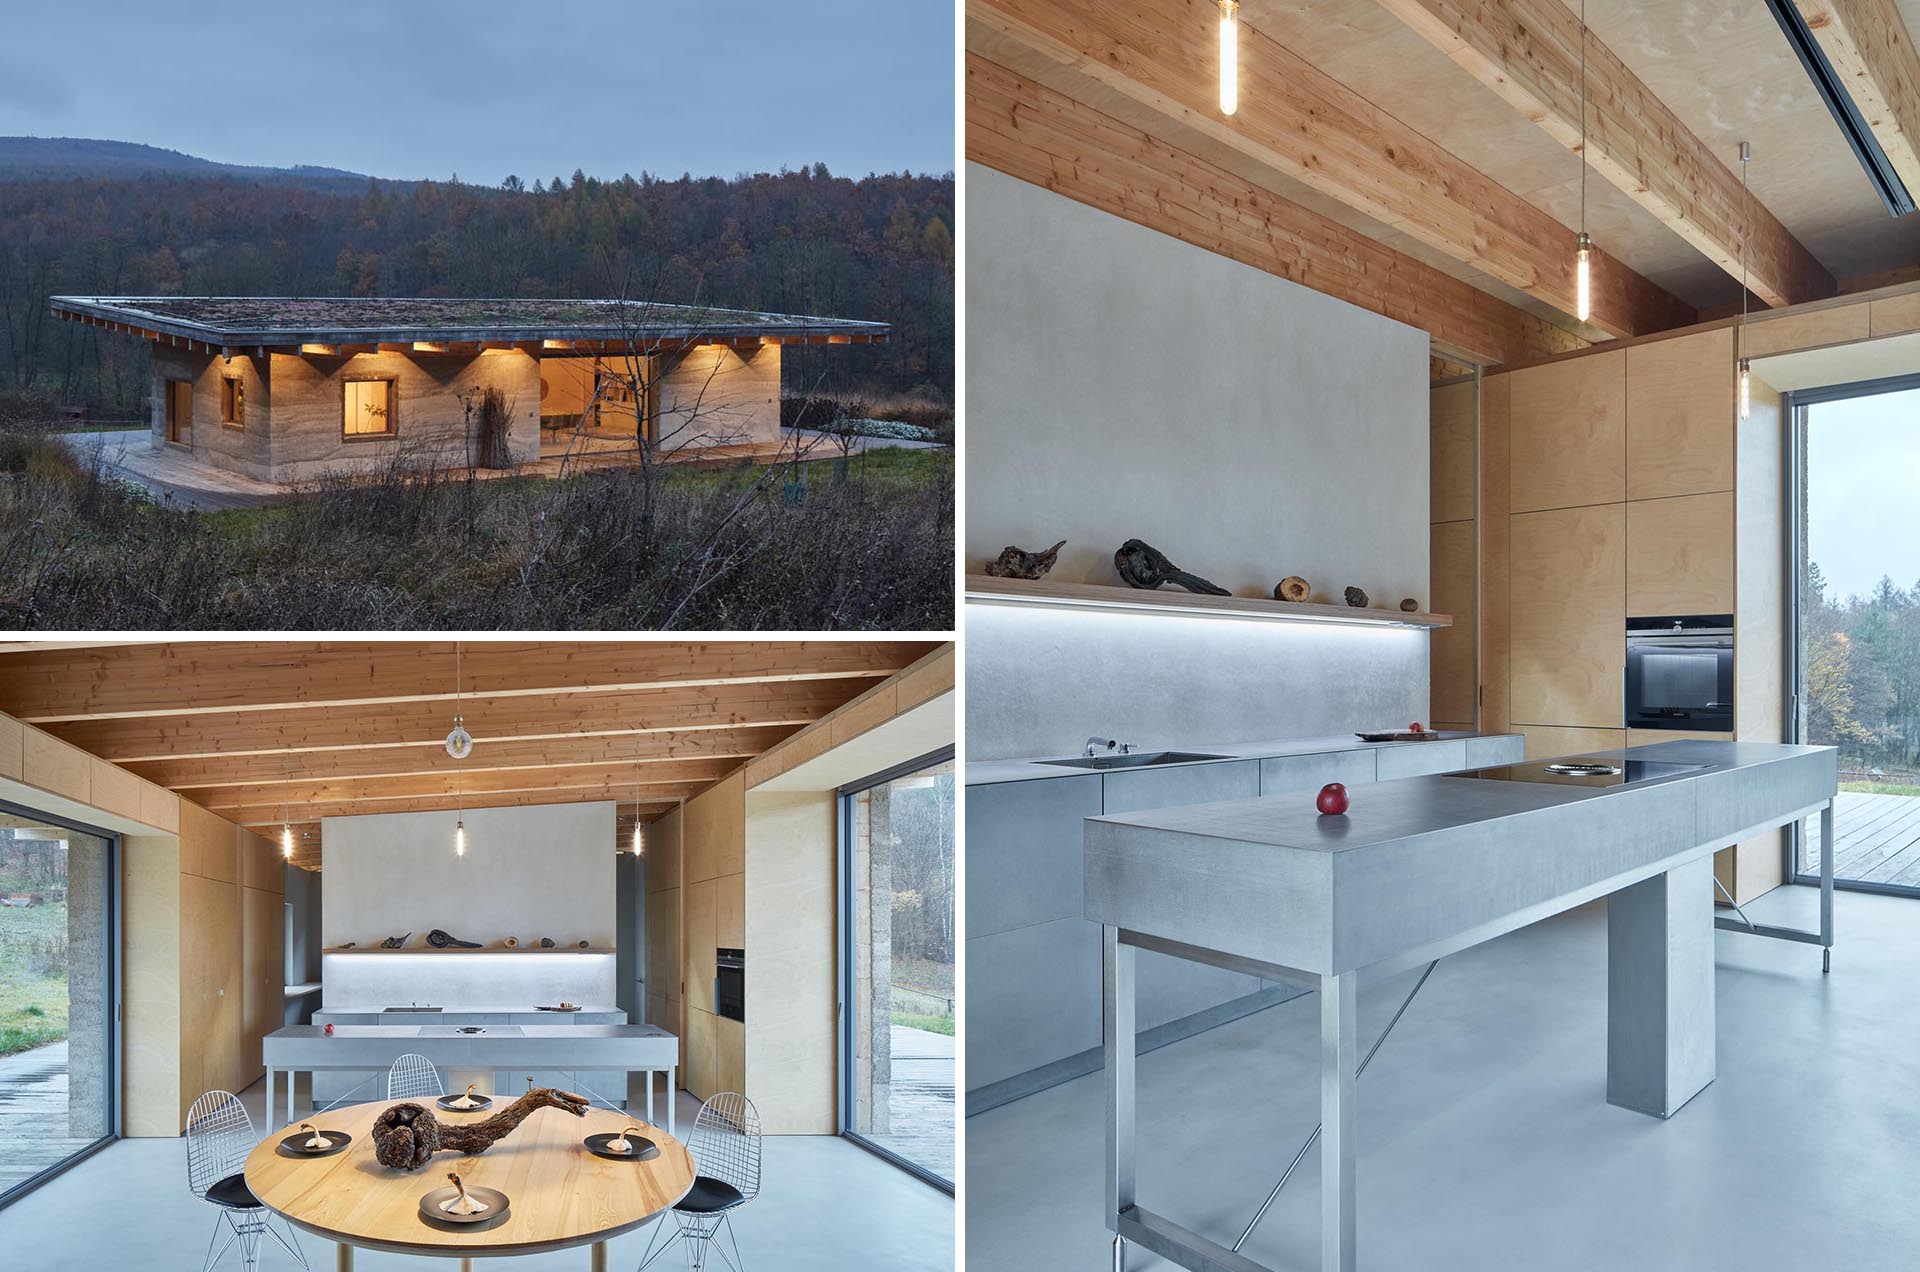 A modern cabin has been designed with hempcrete walls and a green roof.